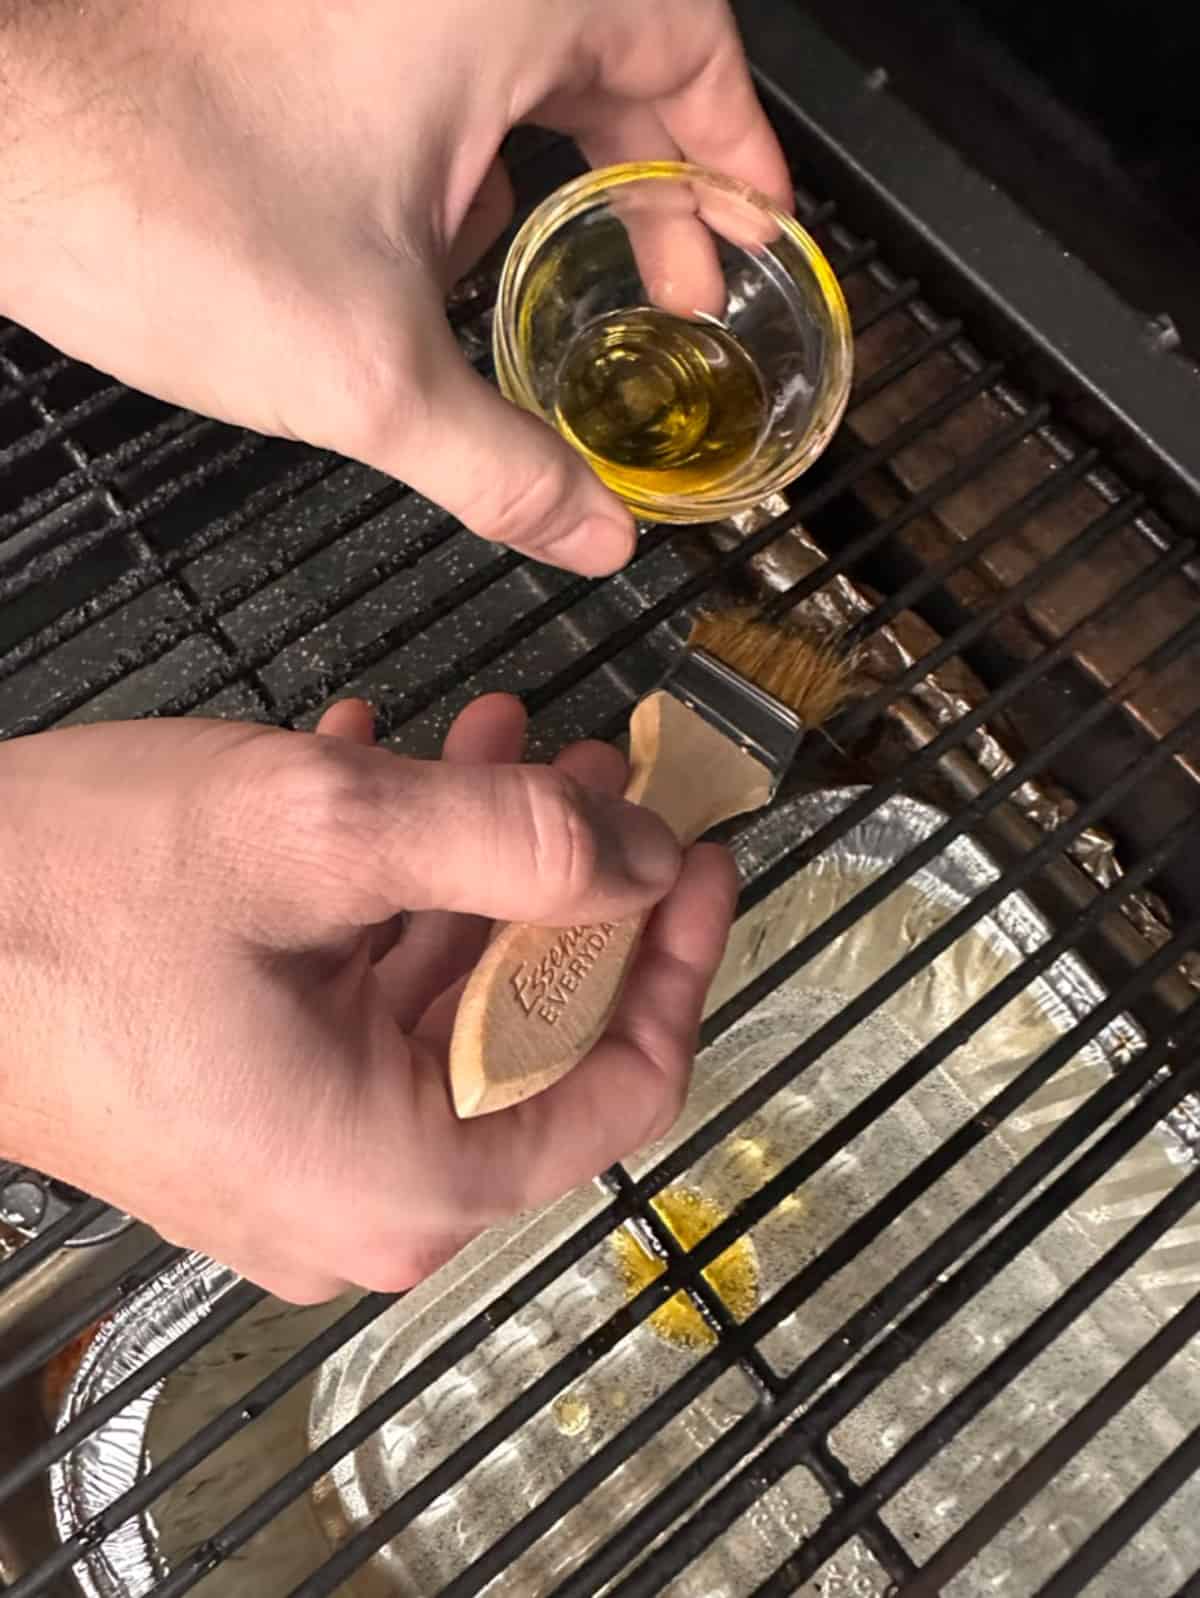 Brushing oil on a grill grate.